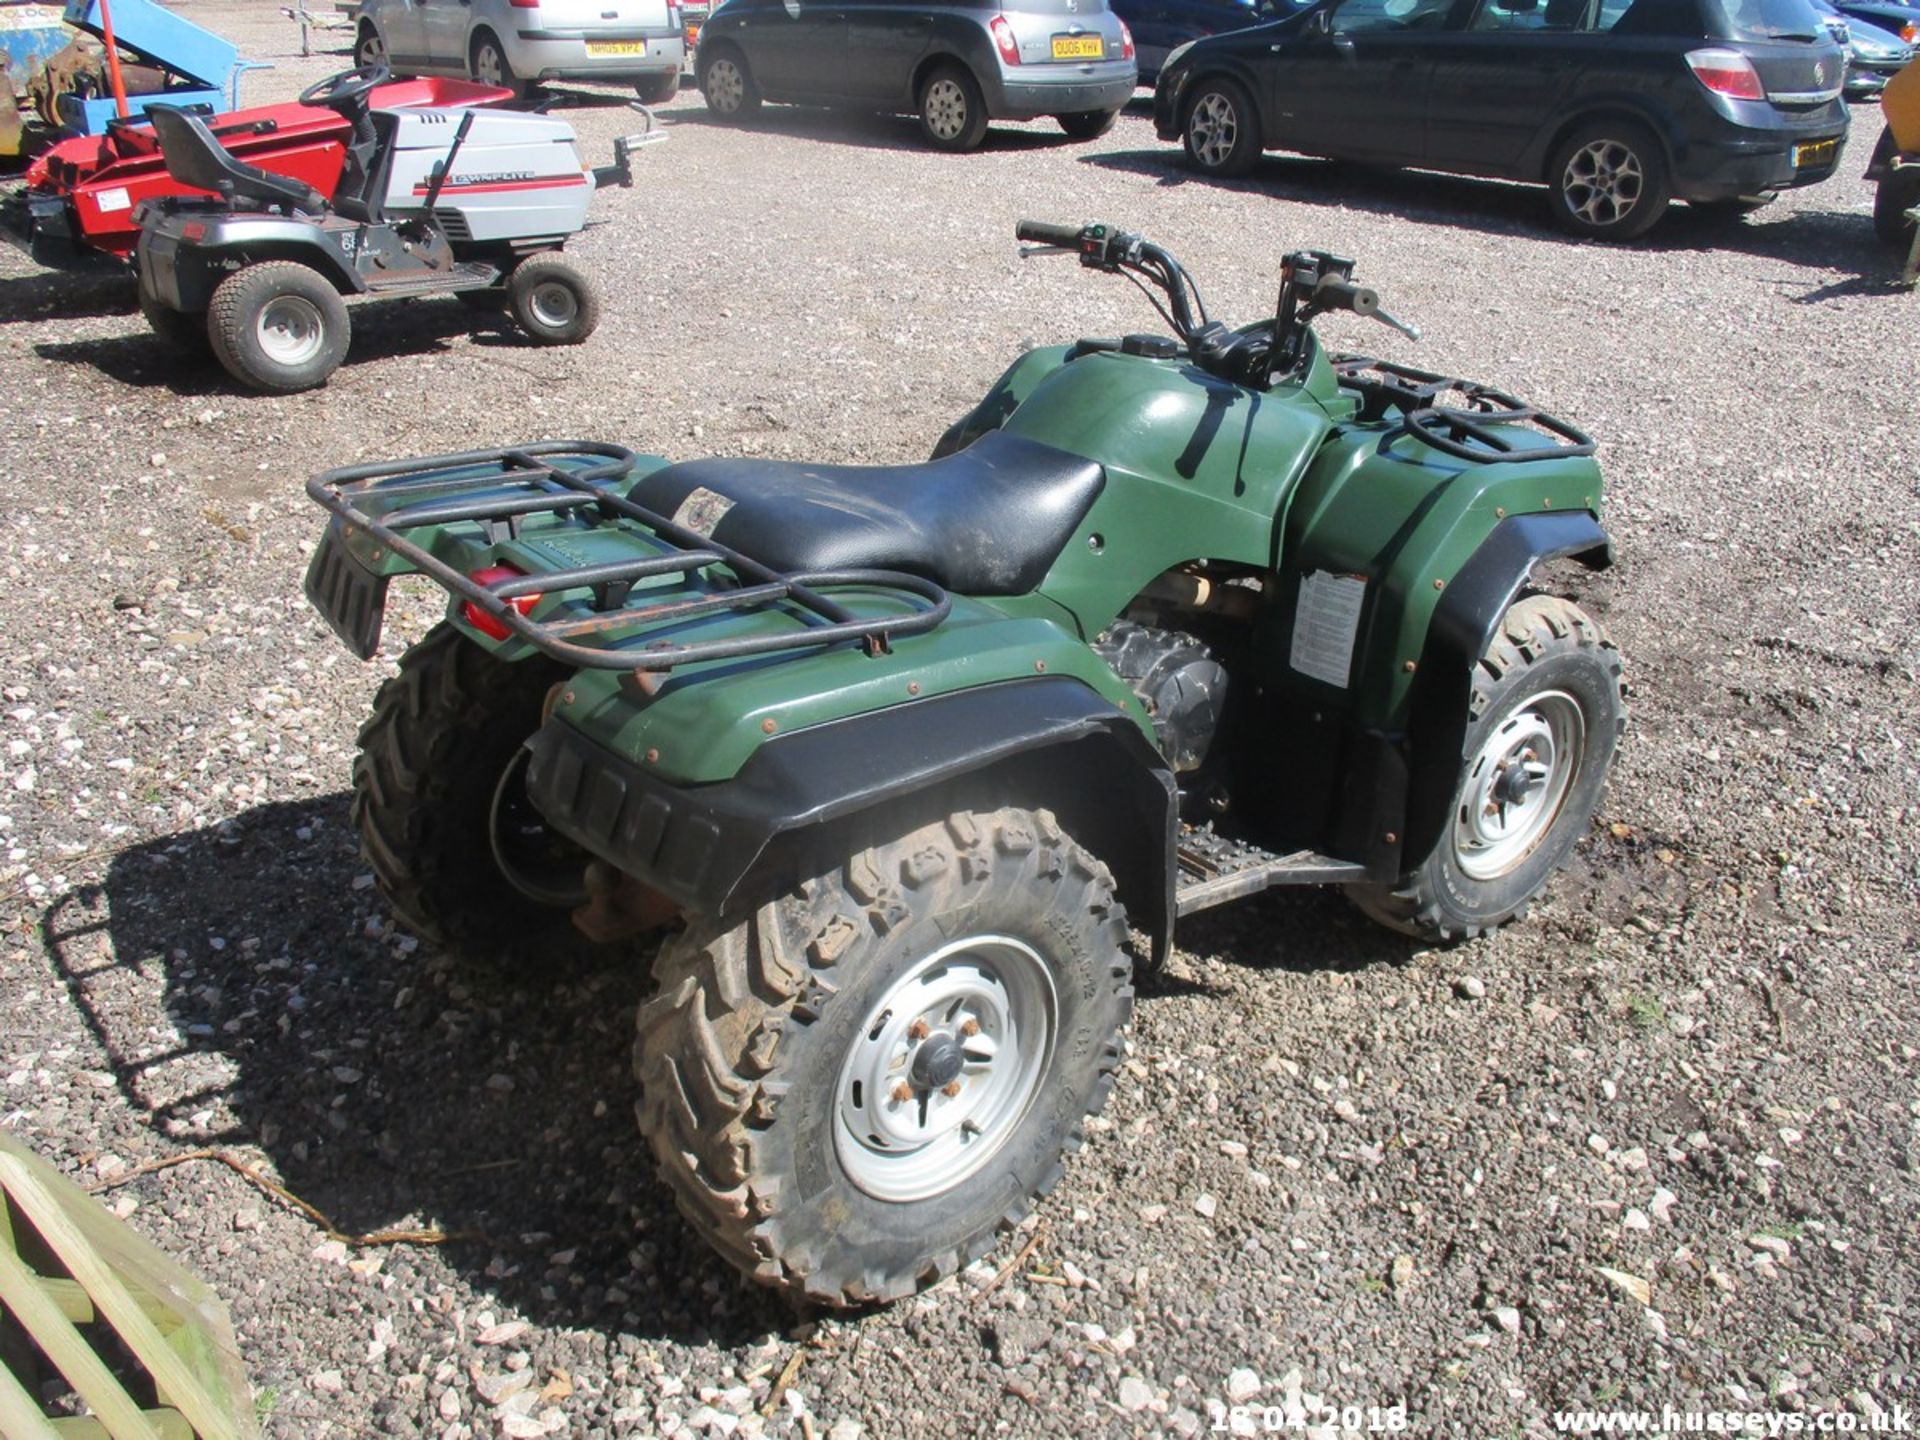 YAMAHA GRIZZLY 350 QUAD 08 5172 MILES - Image 3 of 4